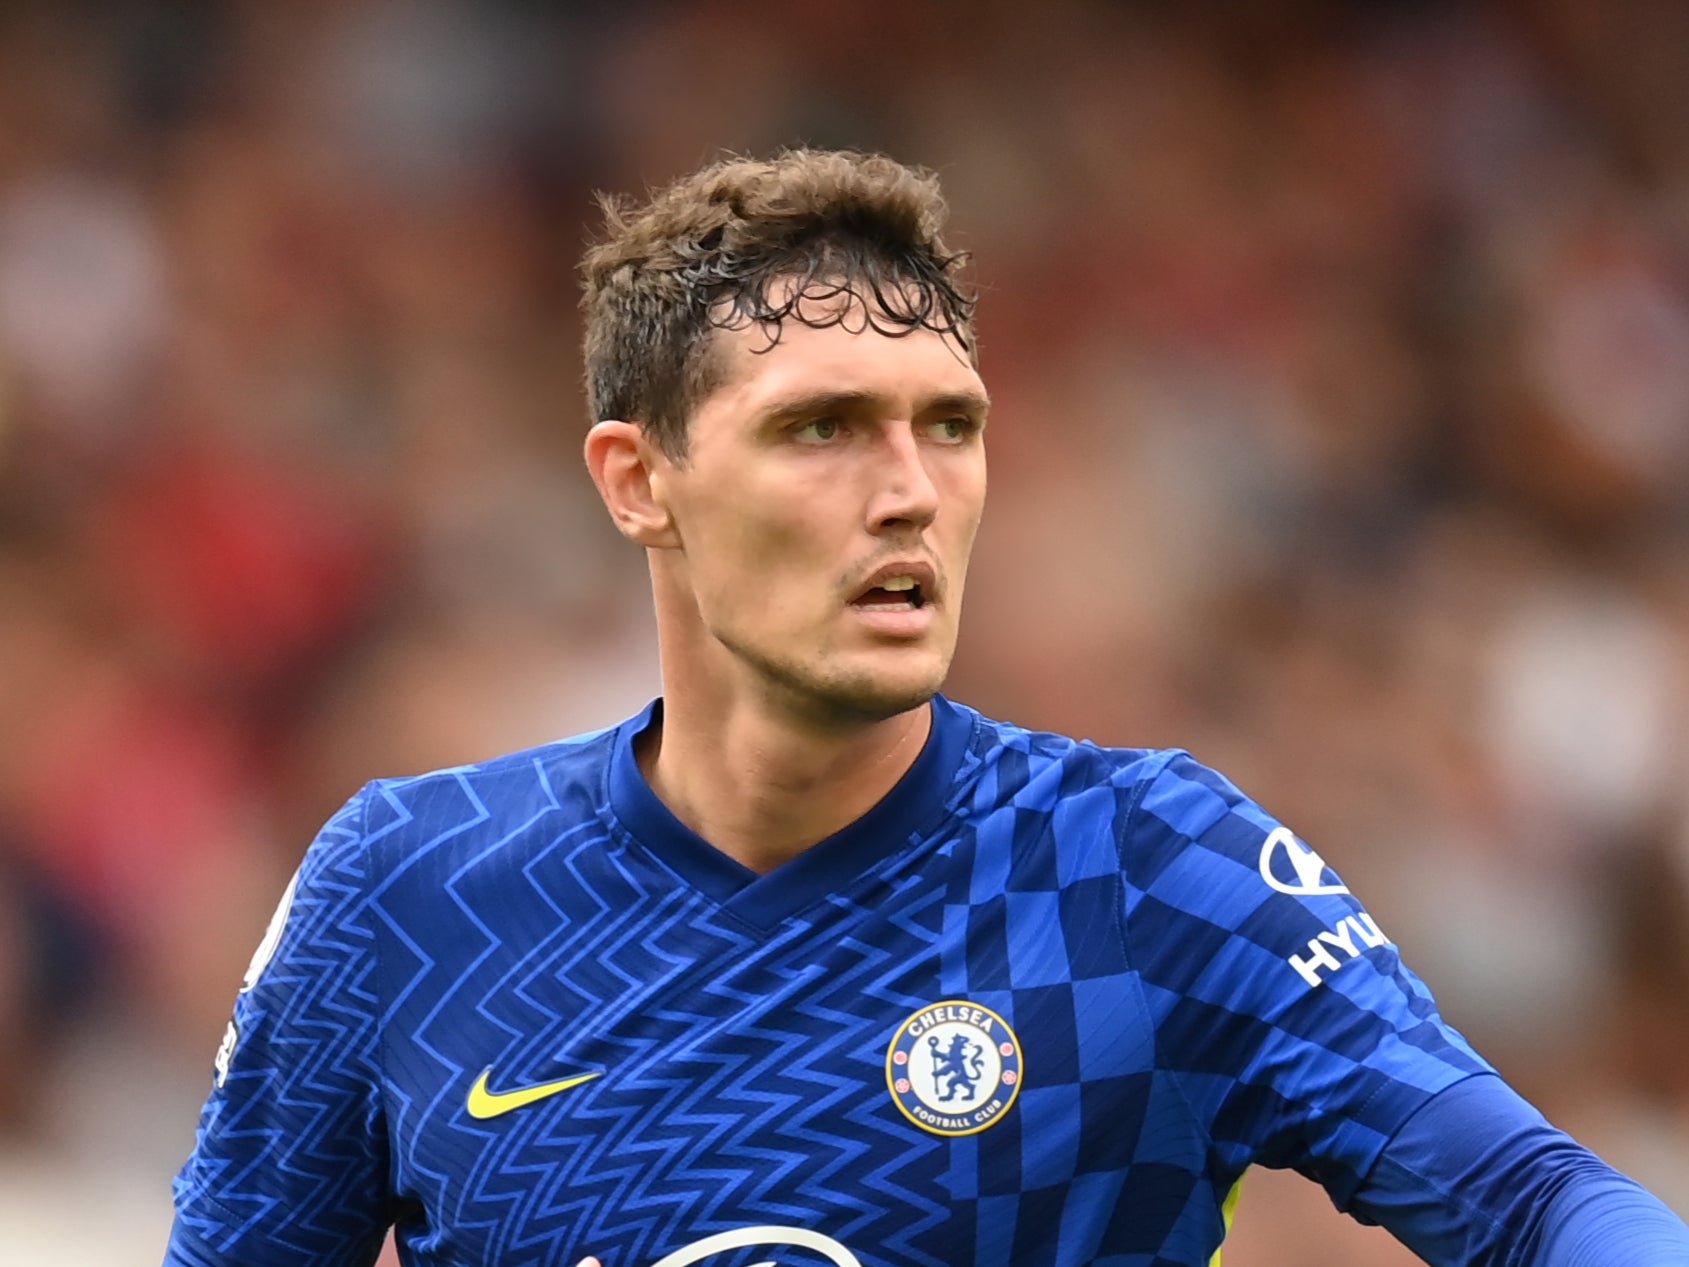 Andreas Christensen of Chelsea is primed to stay at Chelsea long-term